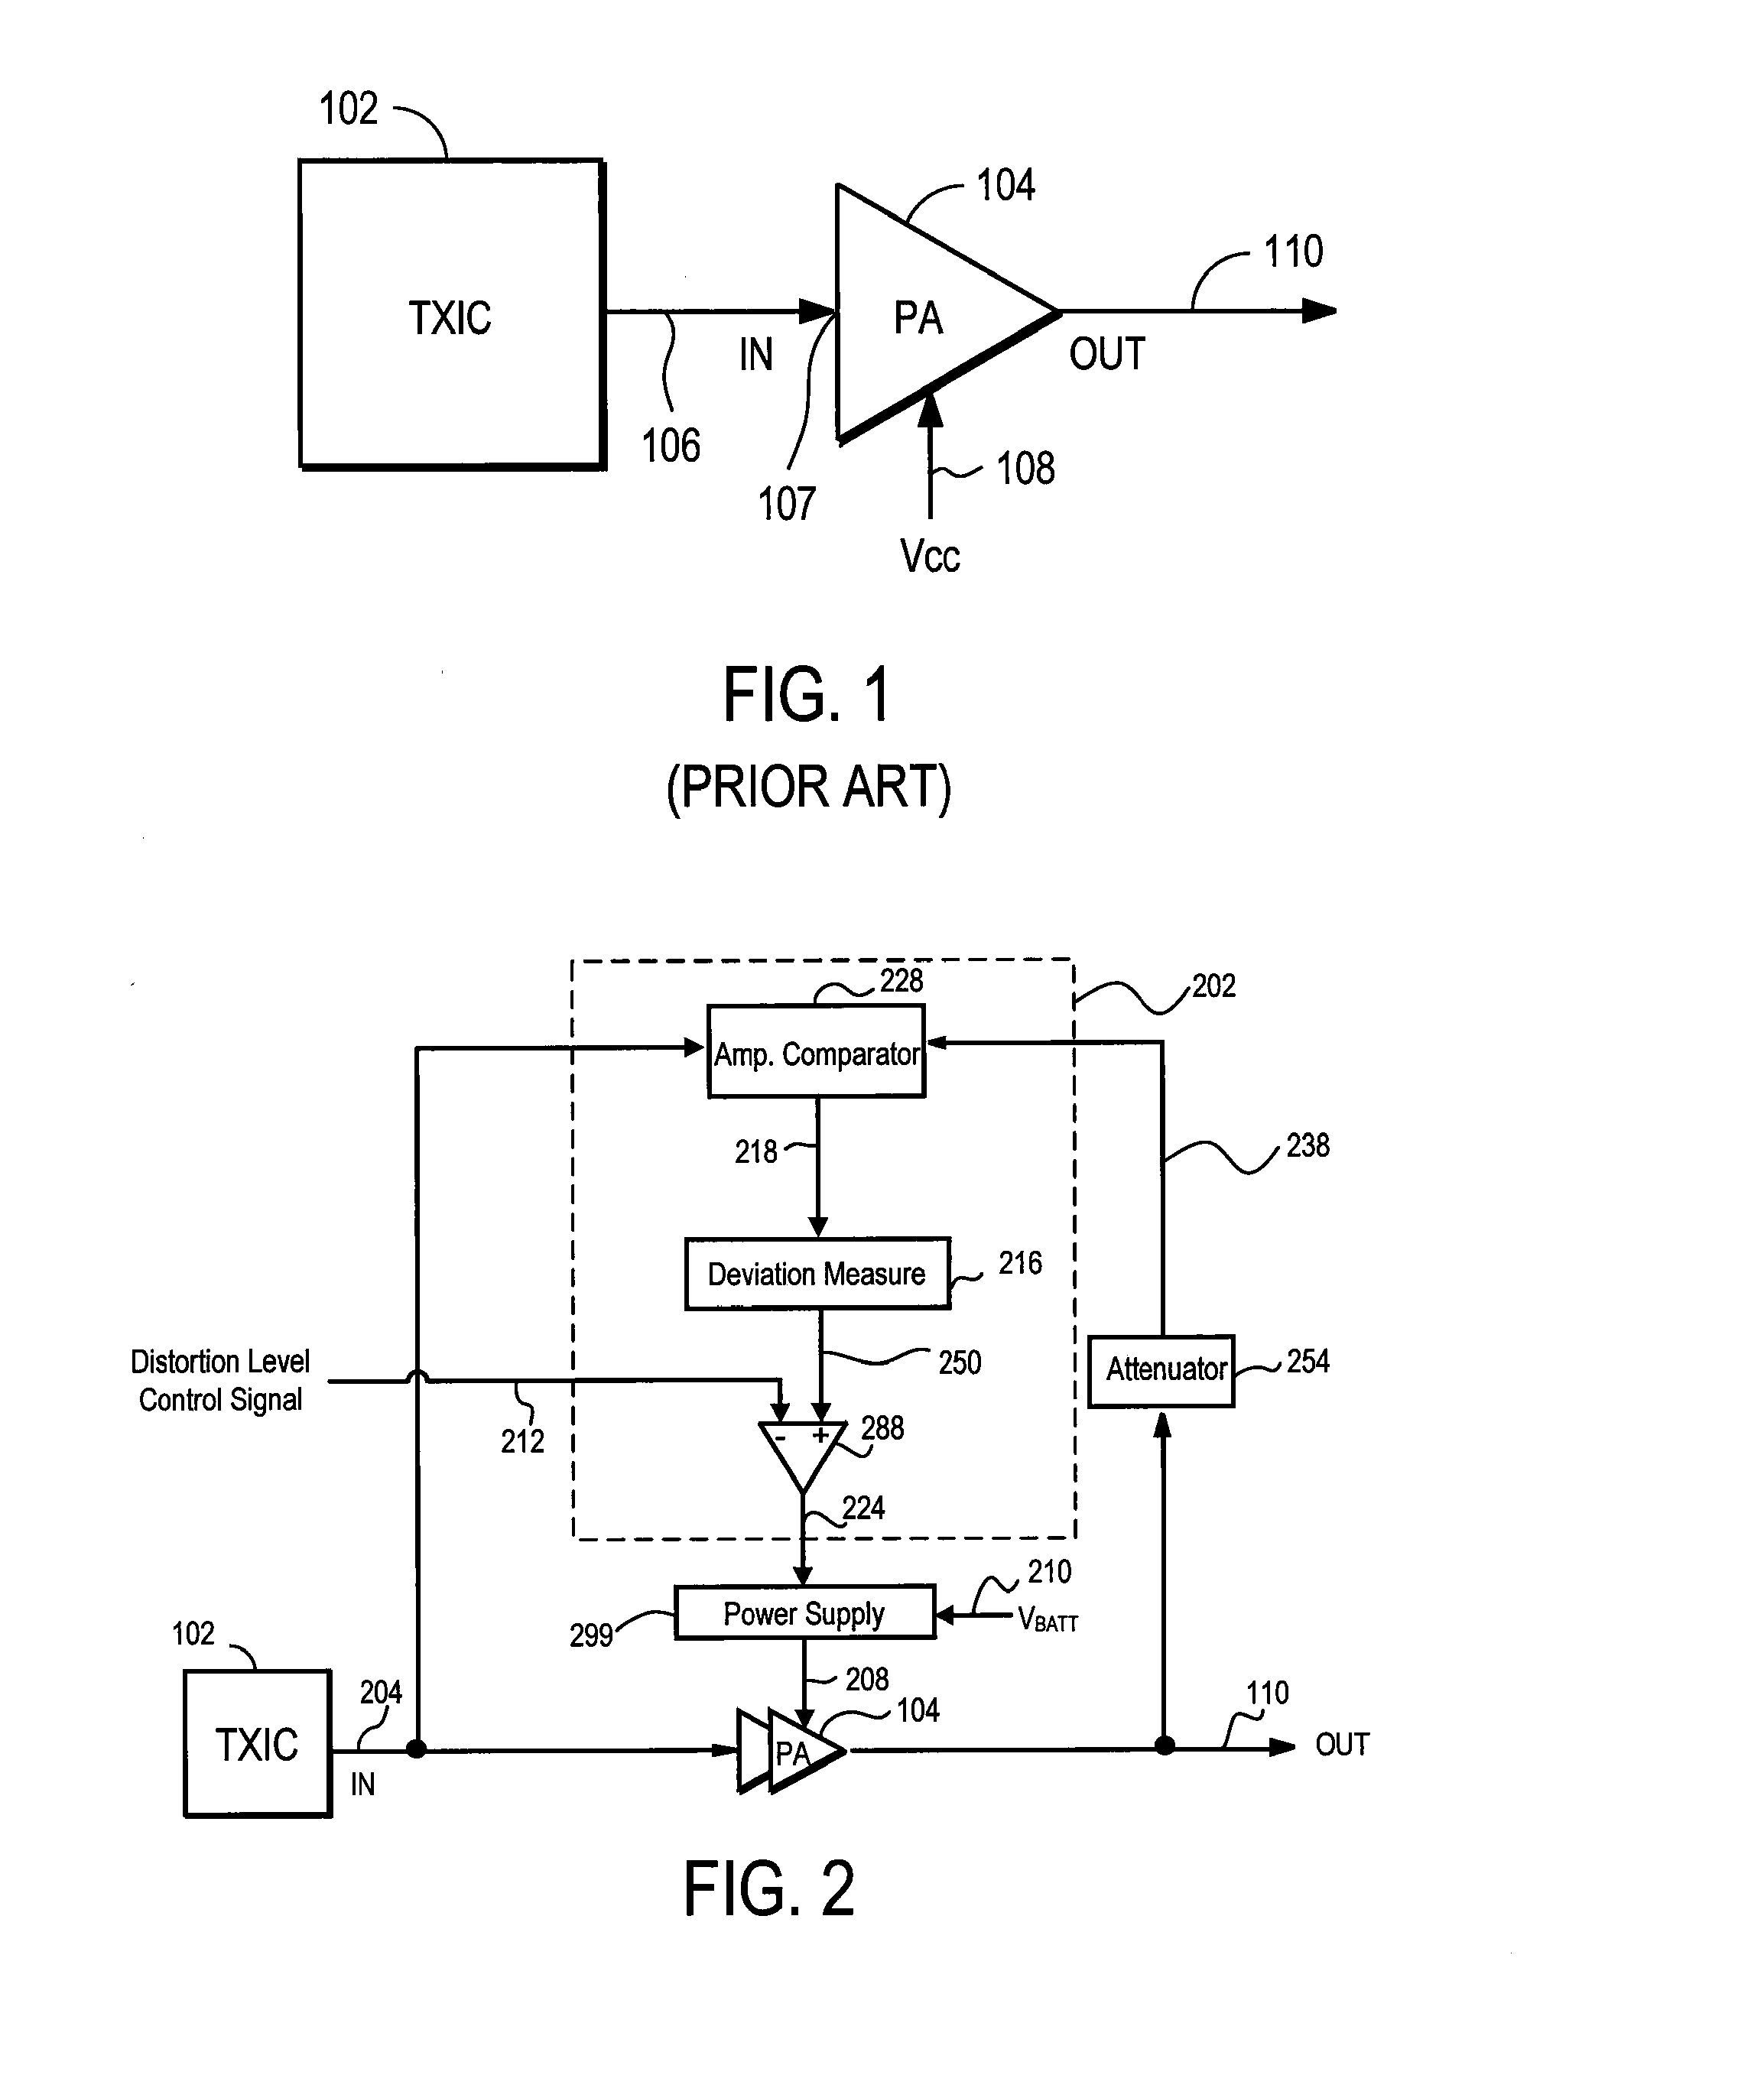 Error driven RF power amplifier control with increased efficiency